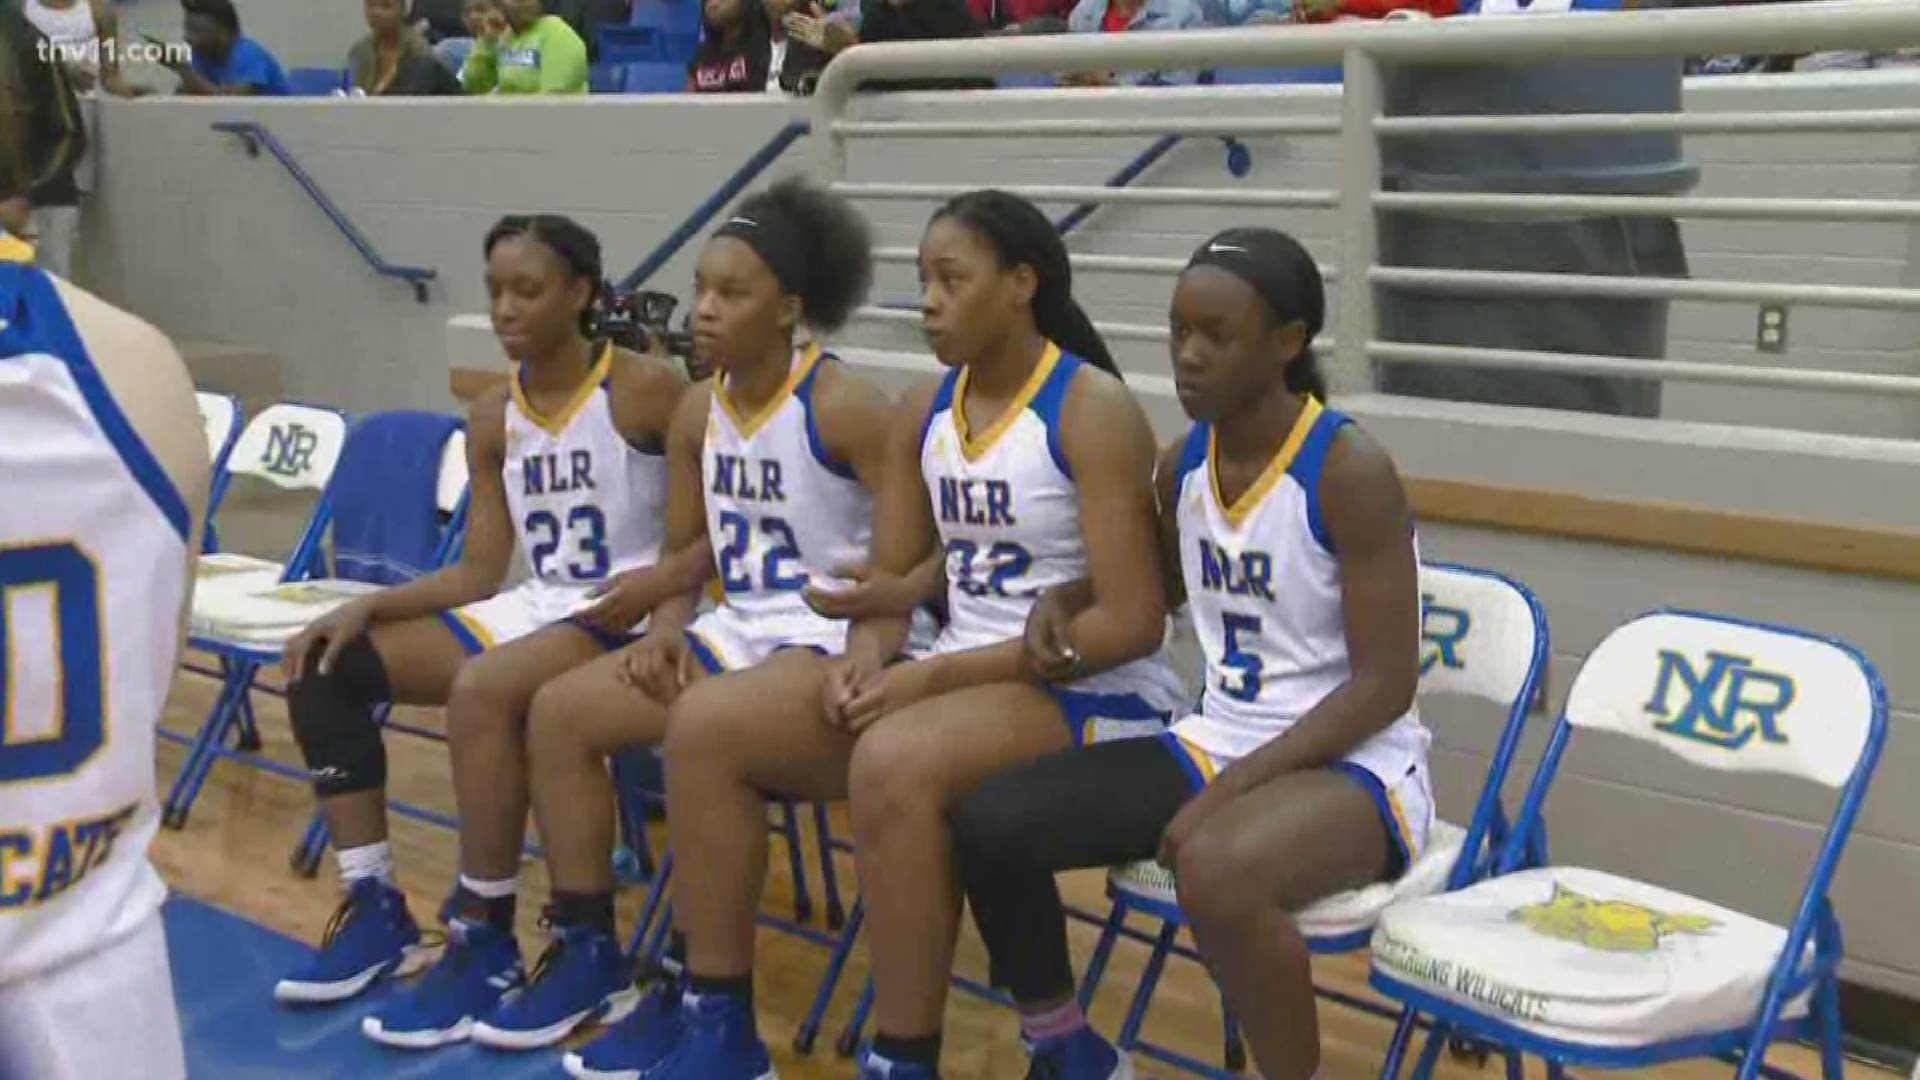 NLR girls end Northside's undefeated season